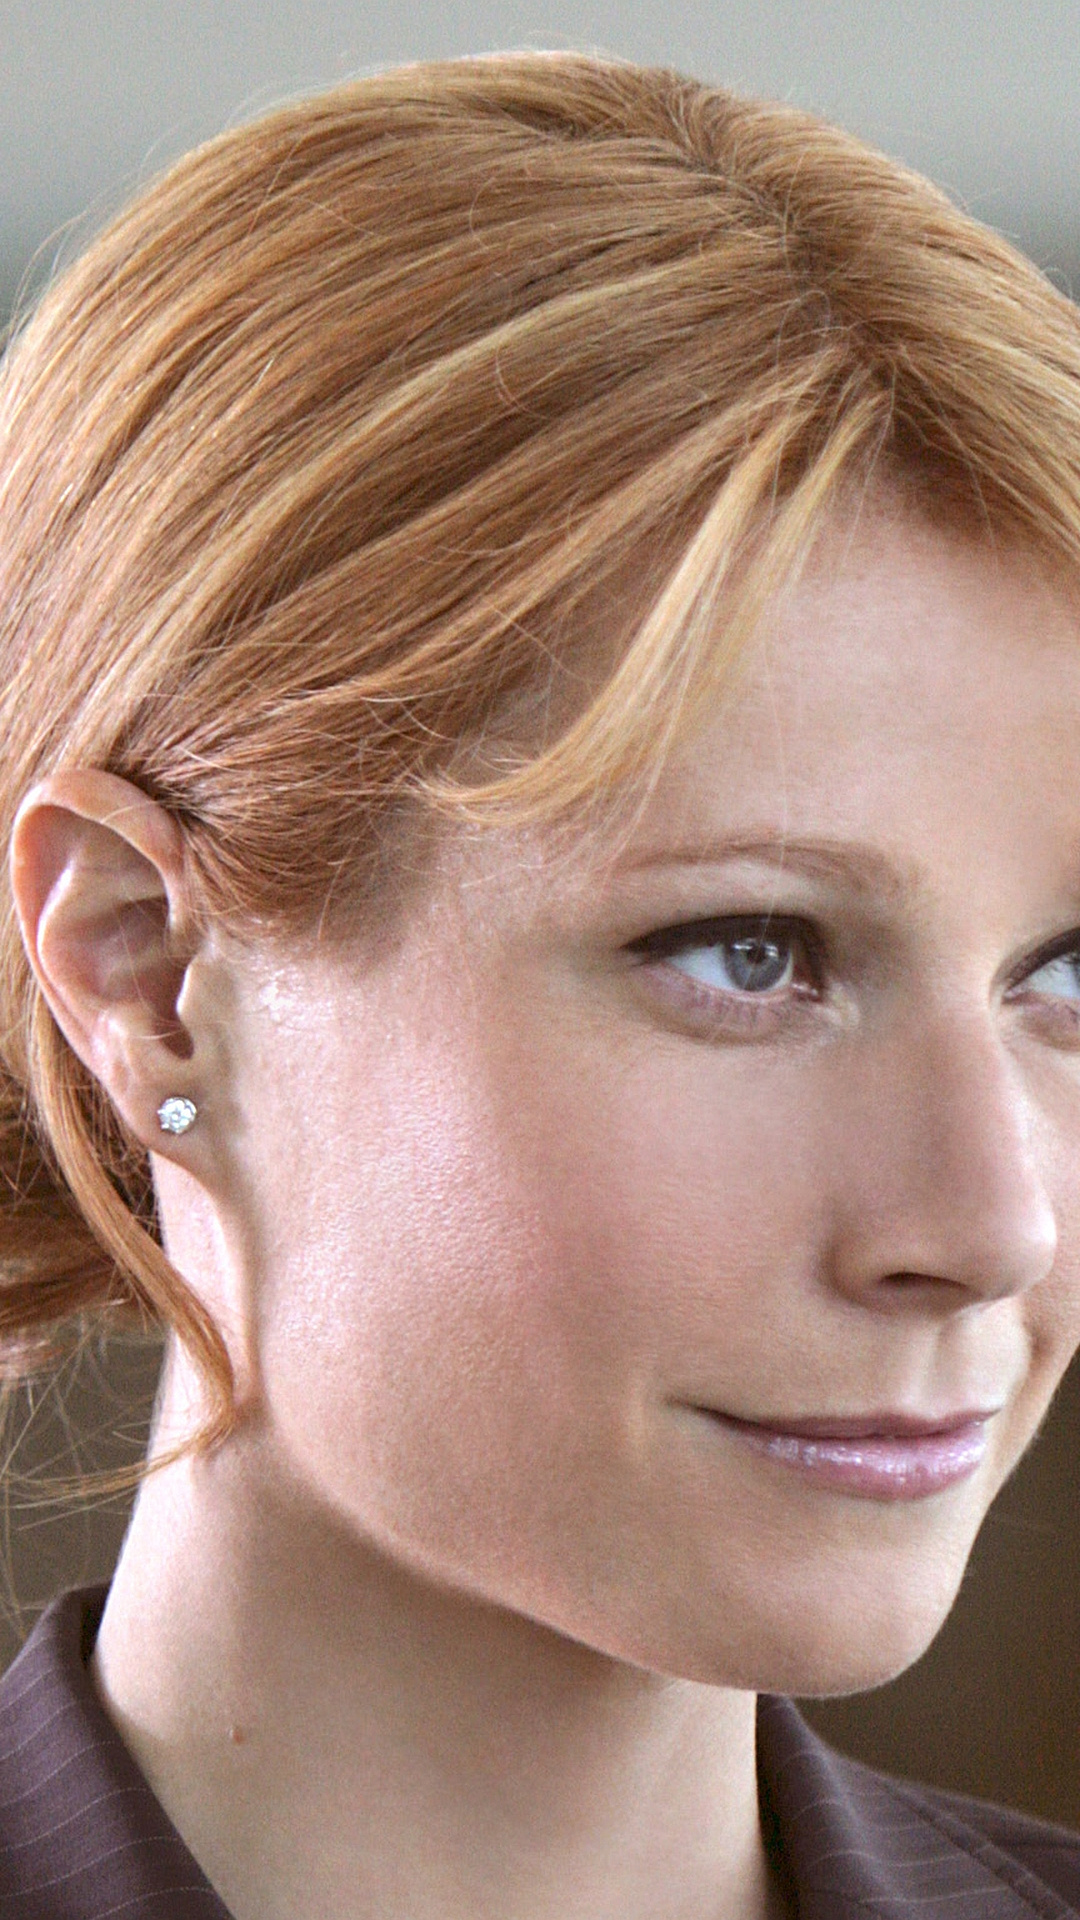 Gwyneth Paltrow, Face wallpaper, Pictures, High-resolution, 1080x1920 Full HD Phone